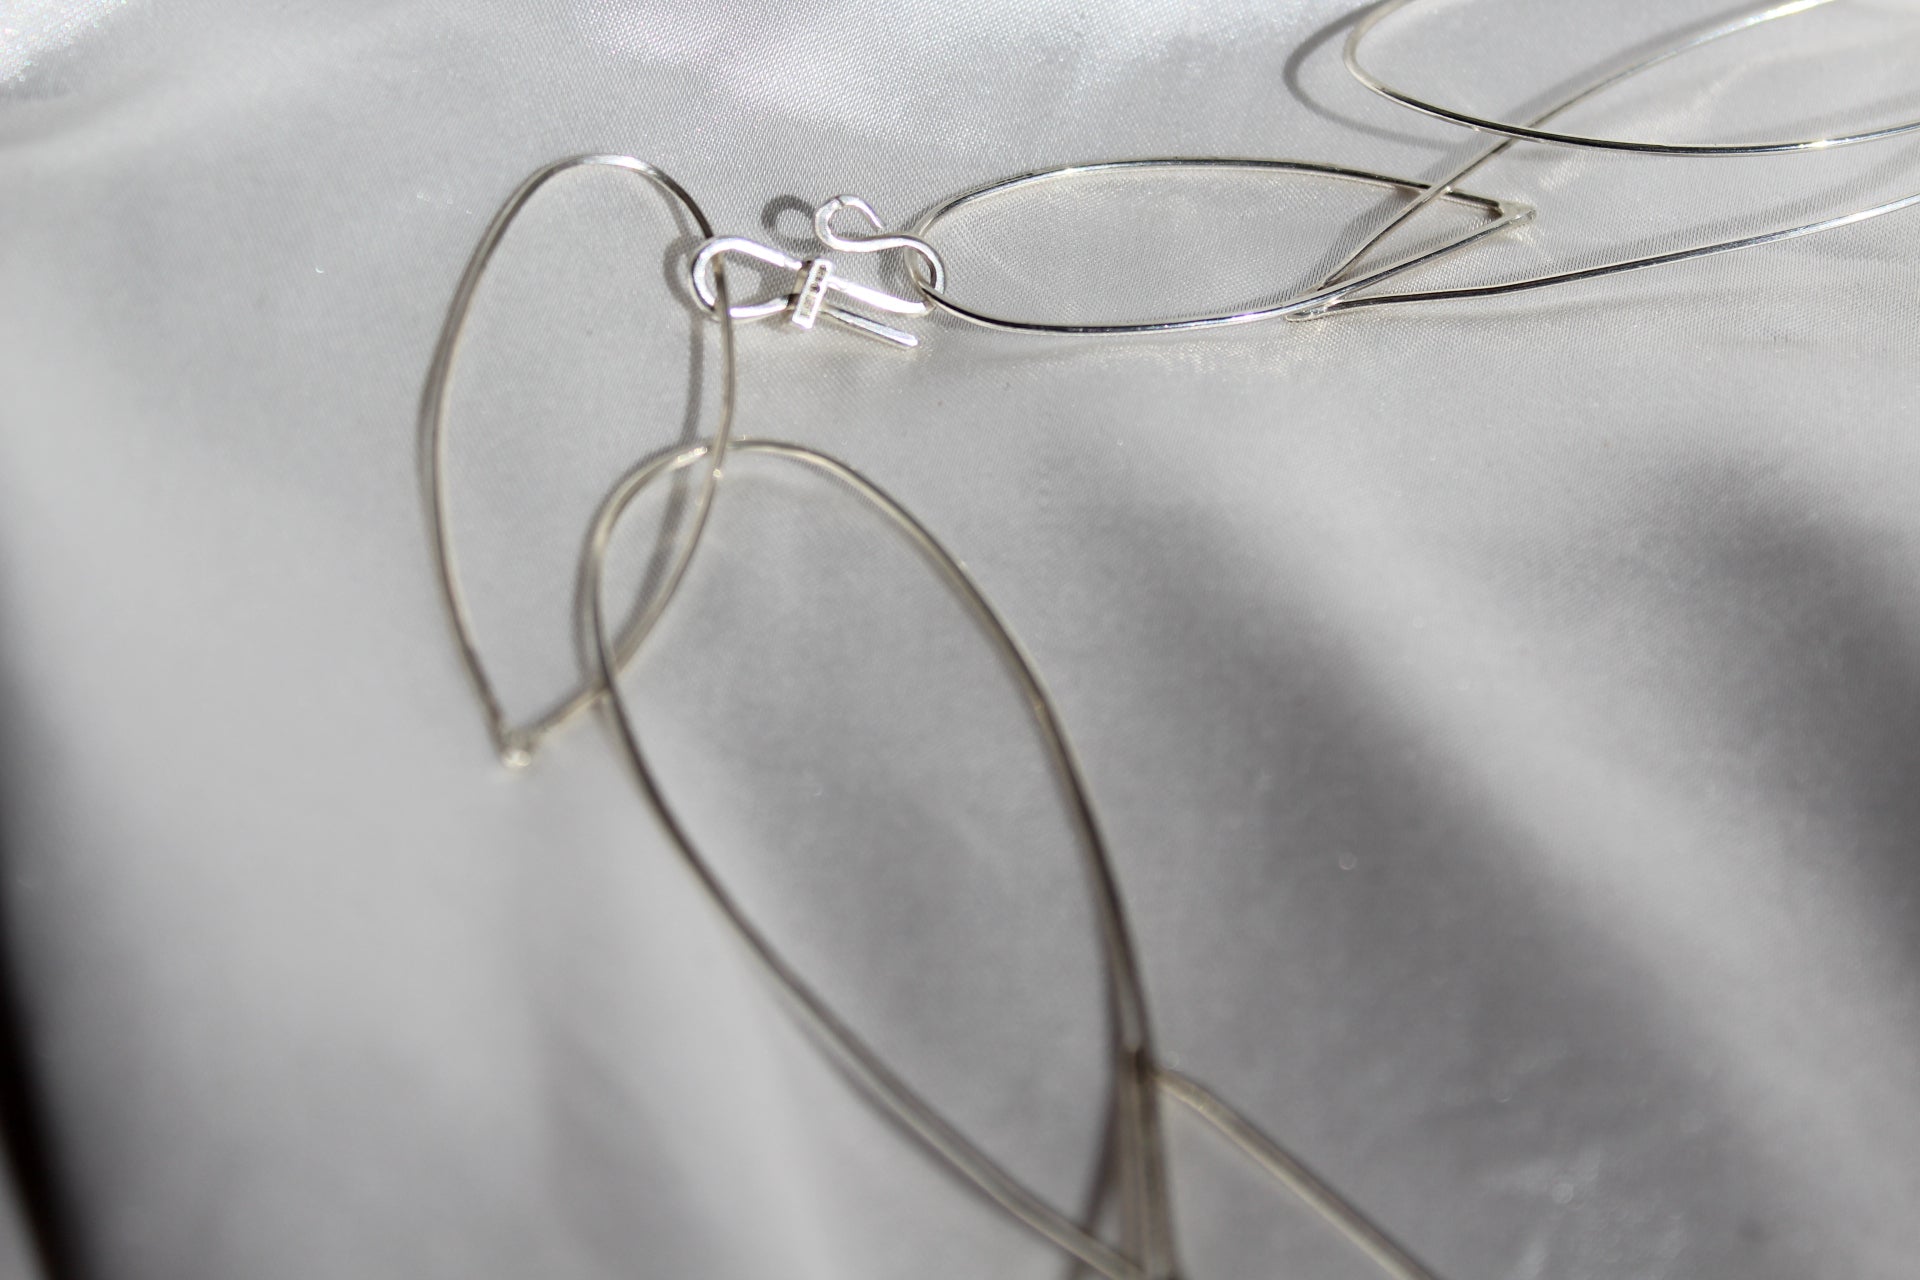 Hall marked sterling silver necklace on a grey silk background